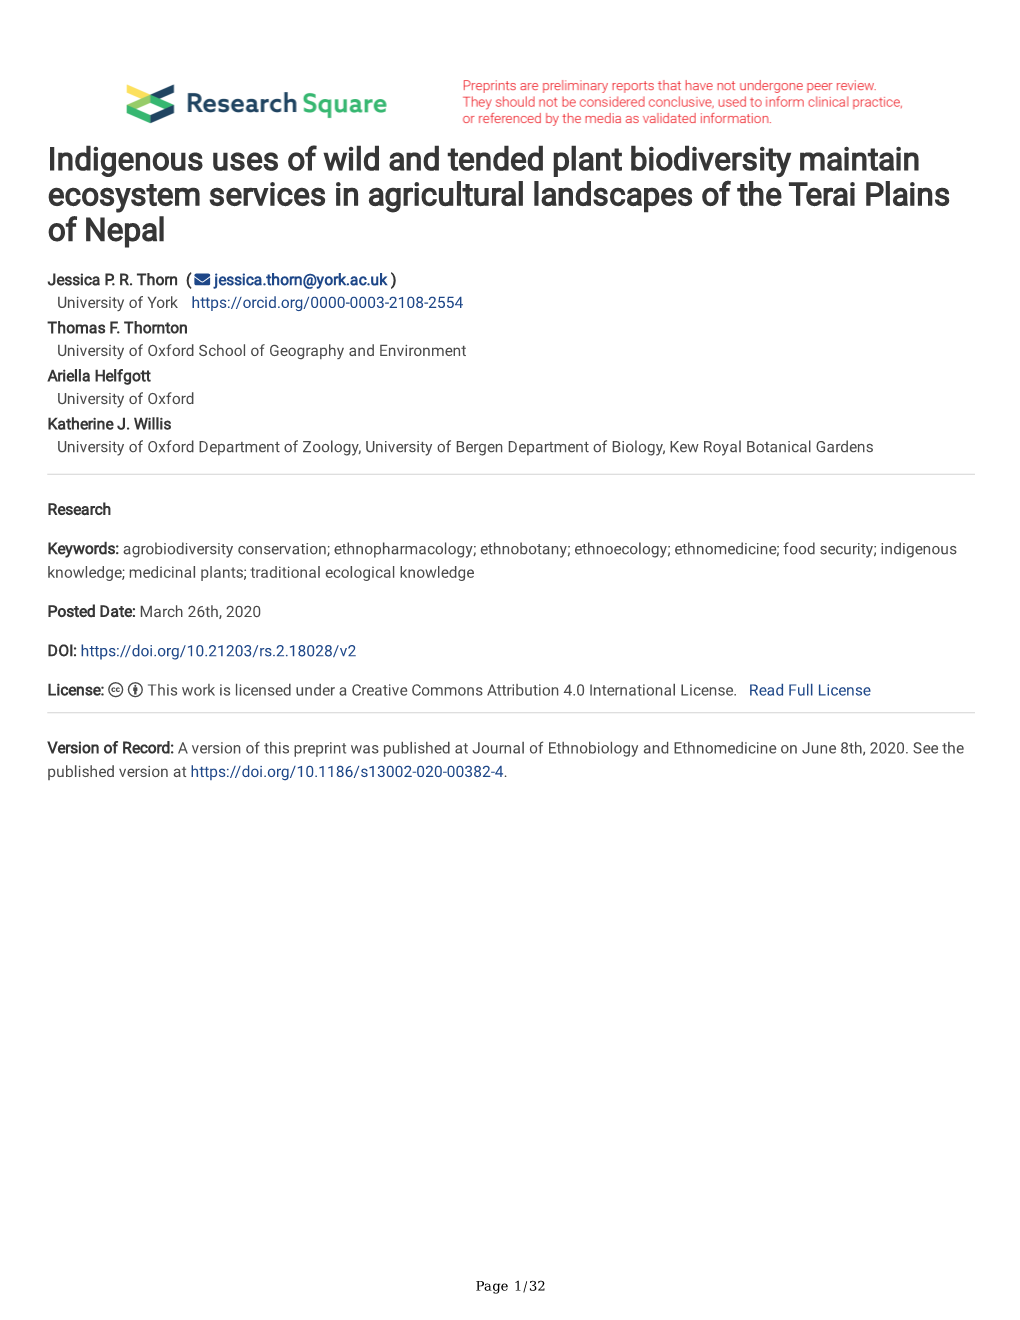 Indigenous Uses of Wild and Tended Plant Biodiversity Maintain Ecosystem Services in Agricultural Landscapes of the Terai Plains of Nepal